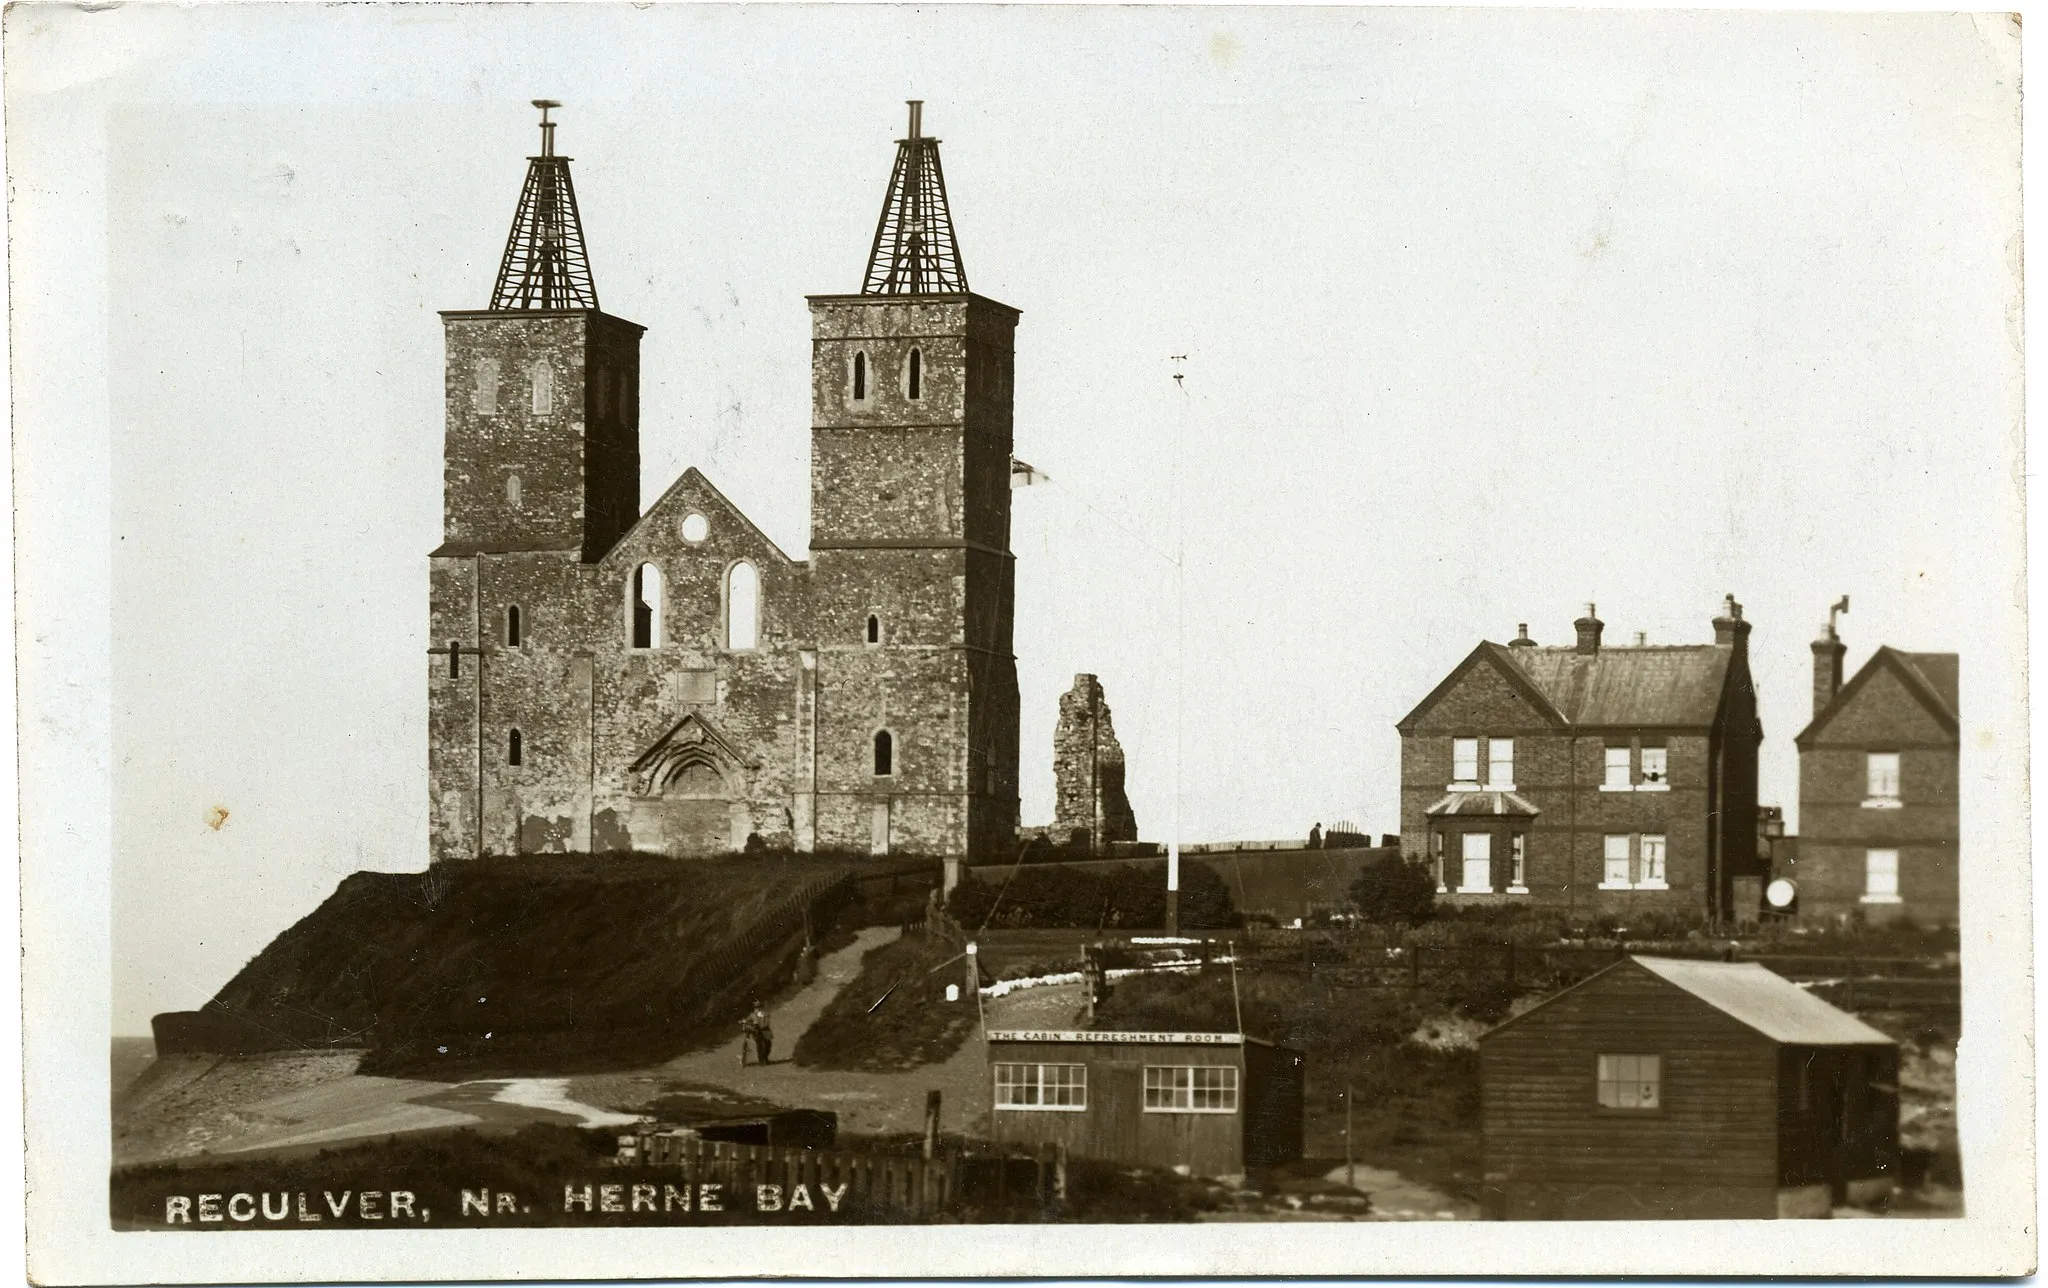 Photo showing: Postcard photo of Reculver Towers, near Herne Bay, Kent England. The photographer was Fred C. Palmer of Tower Studio, Herne Bay, Kent, who died in Hungerford, Berkshire, on 14 March 1941. The postcard is postmarked 6th August 1913.

Border
The remaining border of this image is important for researchers of this photographer. Some photographers trimmed their images more than others, and Palmer has a reputation for producing smaller postcards than other early 20th century UK photographers. He took his own photos, developed them in-house onto postcard-backed photographic paper and trimmed them himself. It is worth adding that during hand-developing the border is actively masked with equipment which both crops the picture and causes the white frame or border to appear on the paper. This frame is part of the design and is one of the reasons why the quality of Palmer's work is so interesting, and why there is an article and category for him on English Wiki. Researchers need to see exactly where the edge of the postcard is. Thank you for taking the time to read this.